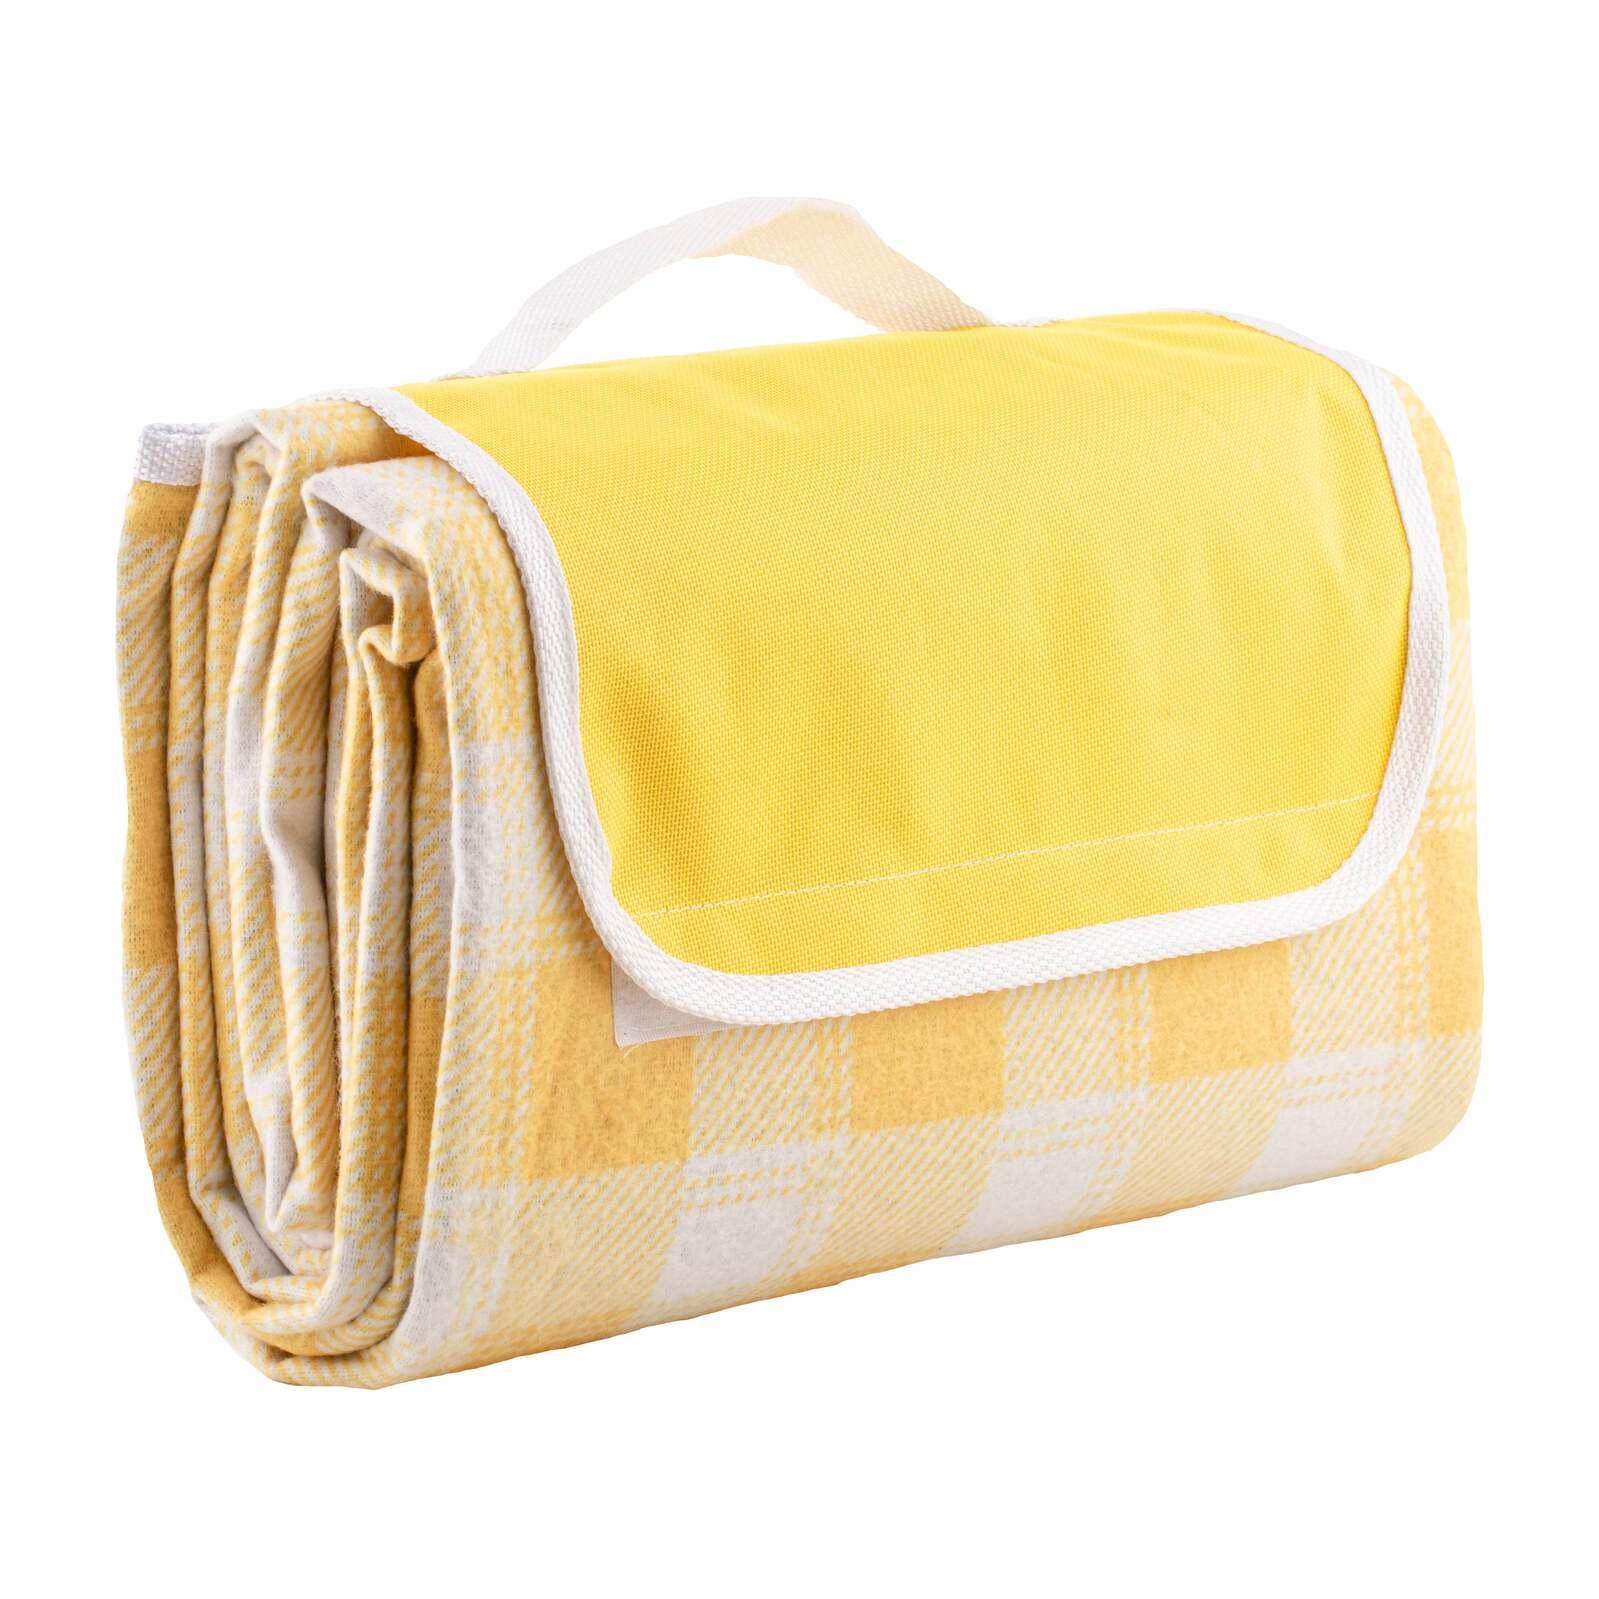 Delilah Gingham 150cm Foldable Picnic Blanket Outdoor Mat w/ Carry Handle Yellow